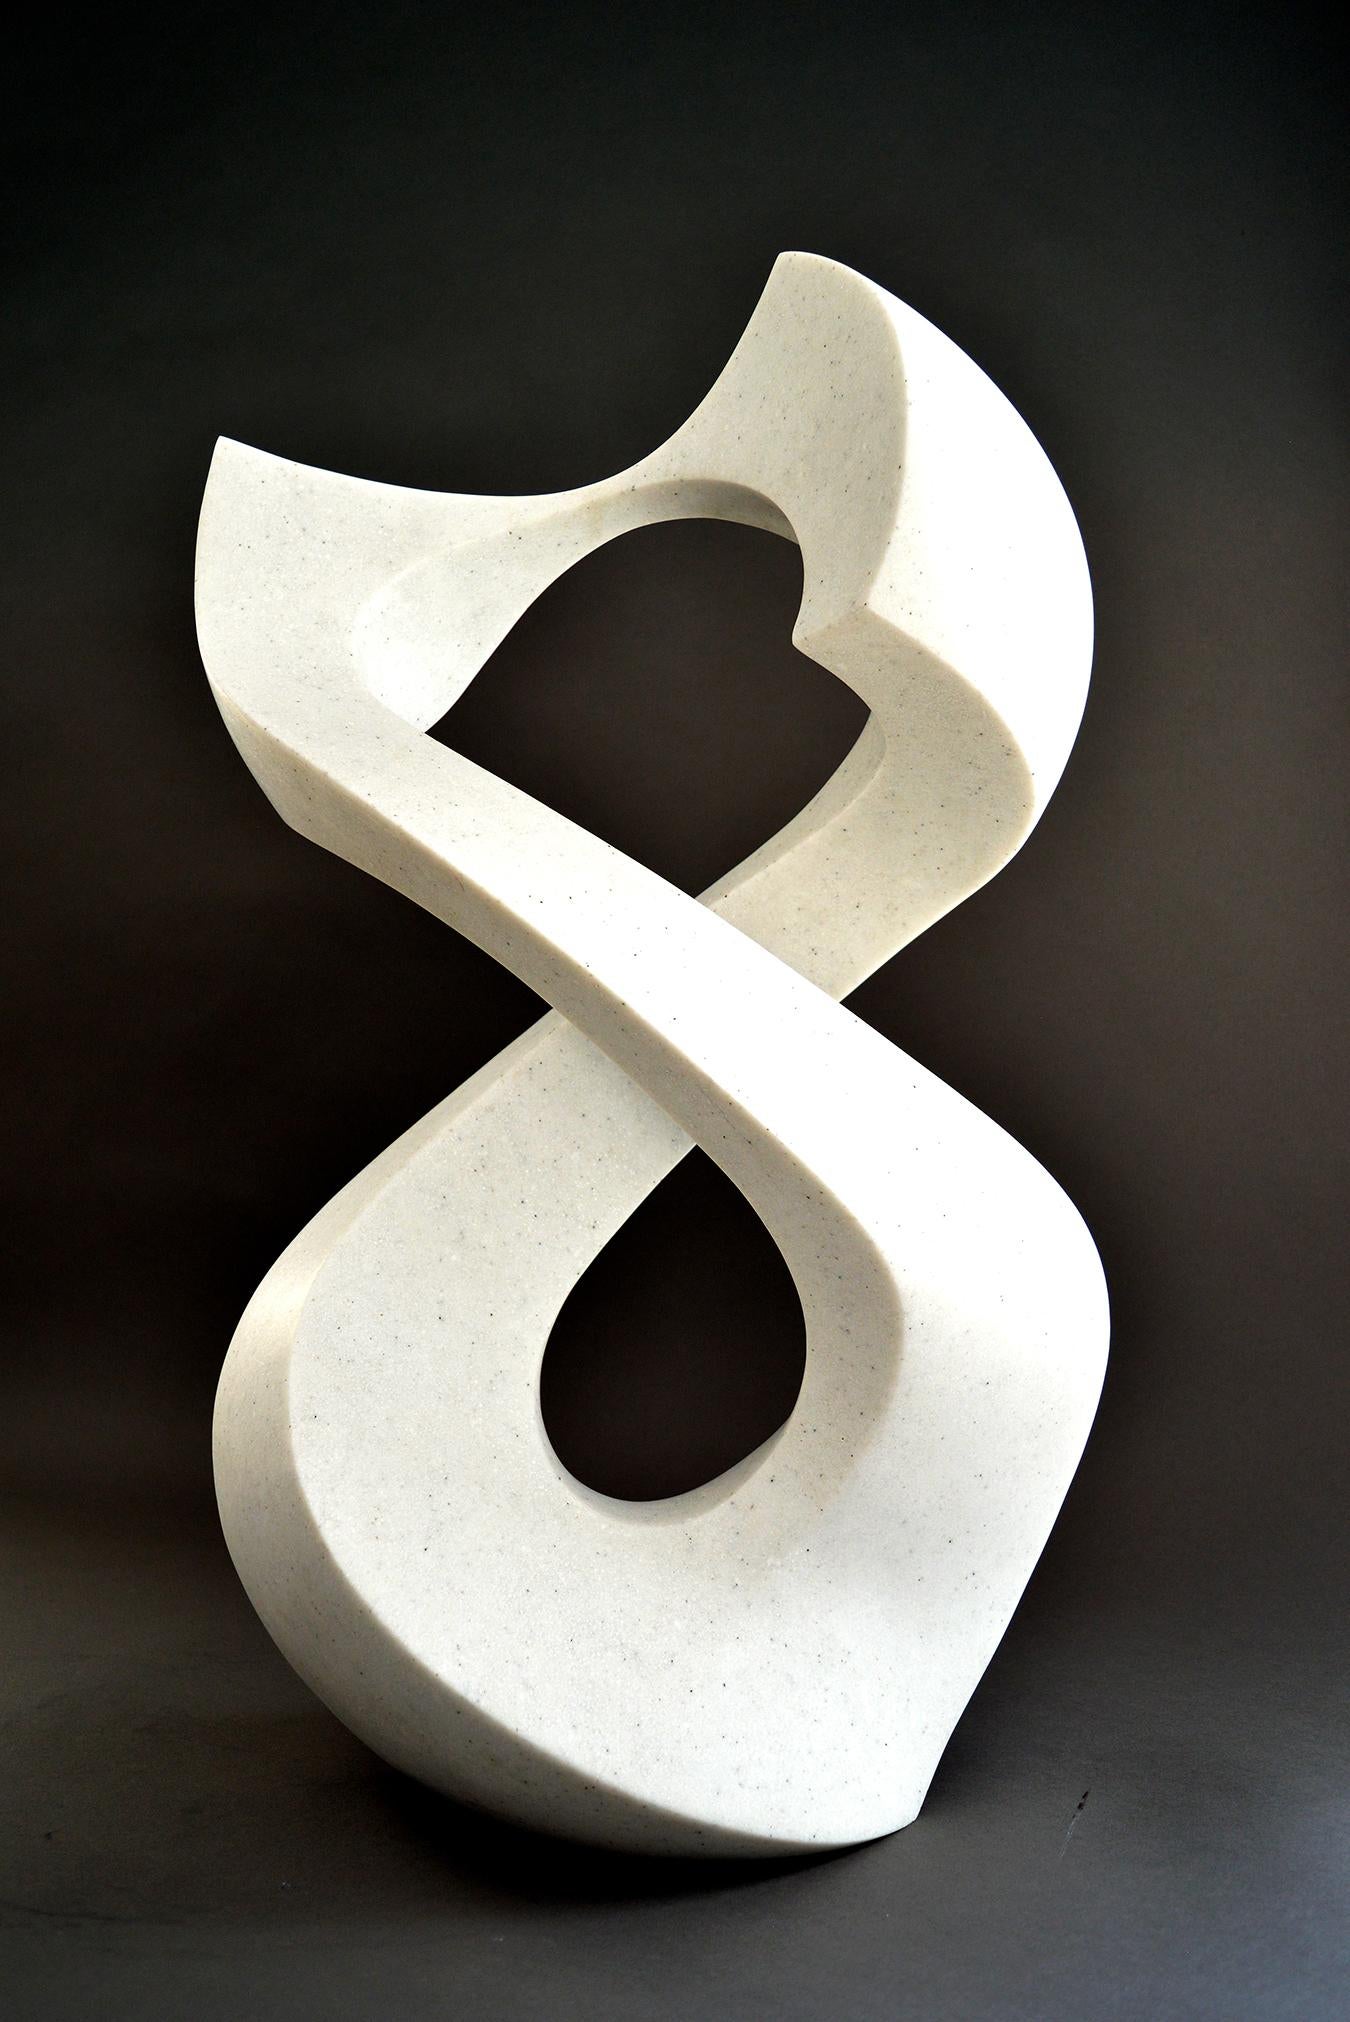 Halcyon White 3/50 - smooth, polished, abstract, engineered stone sculpture - Contemporary Sculpture by Jeremy Guy